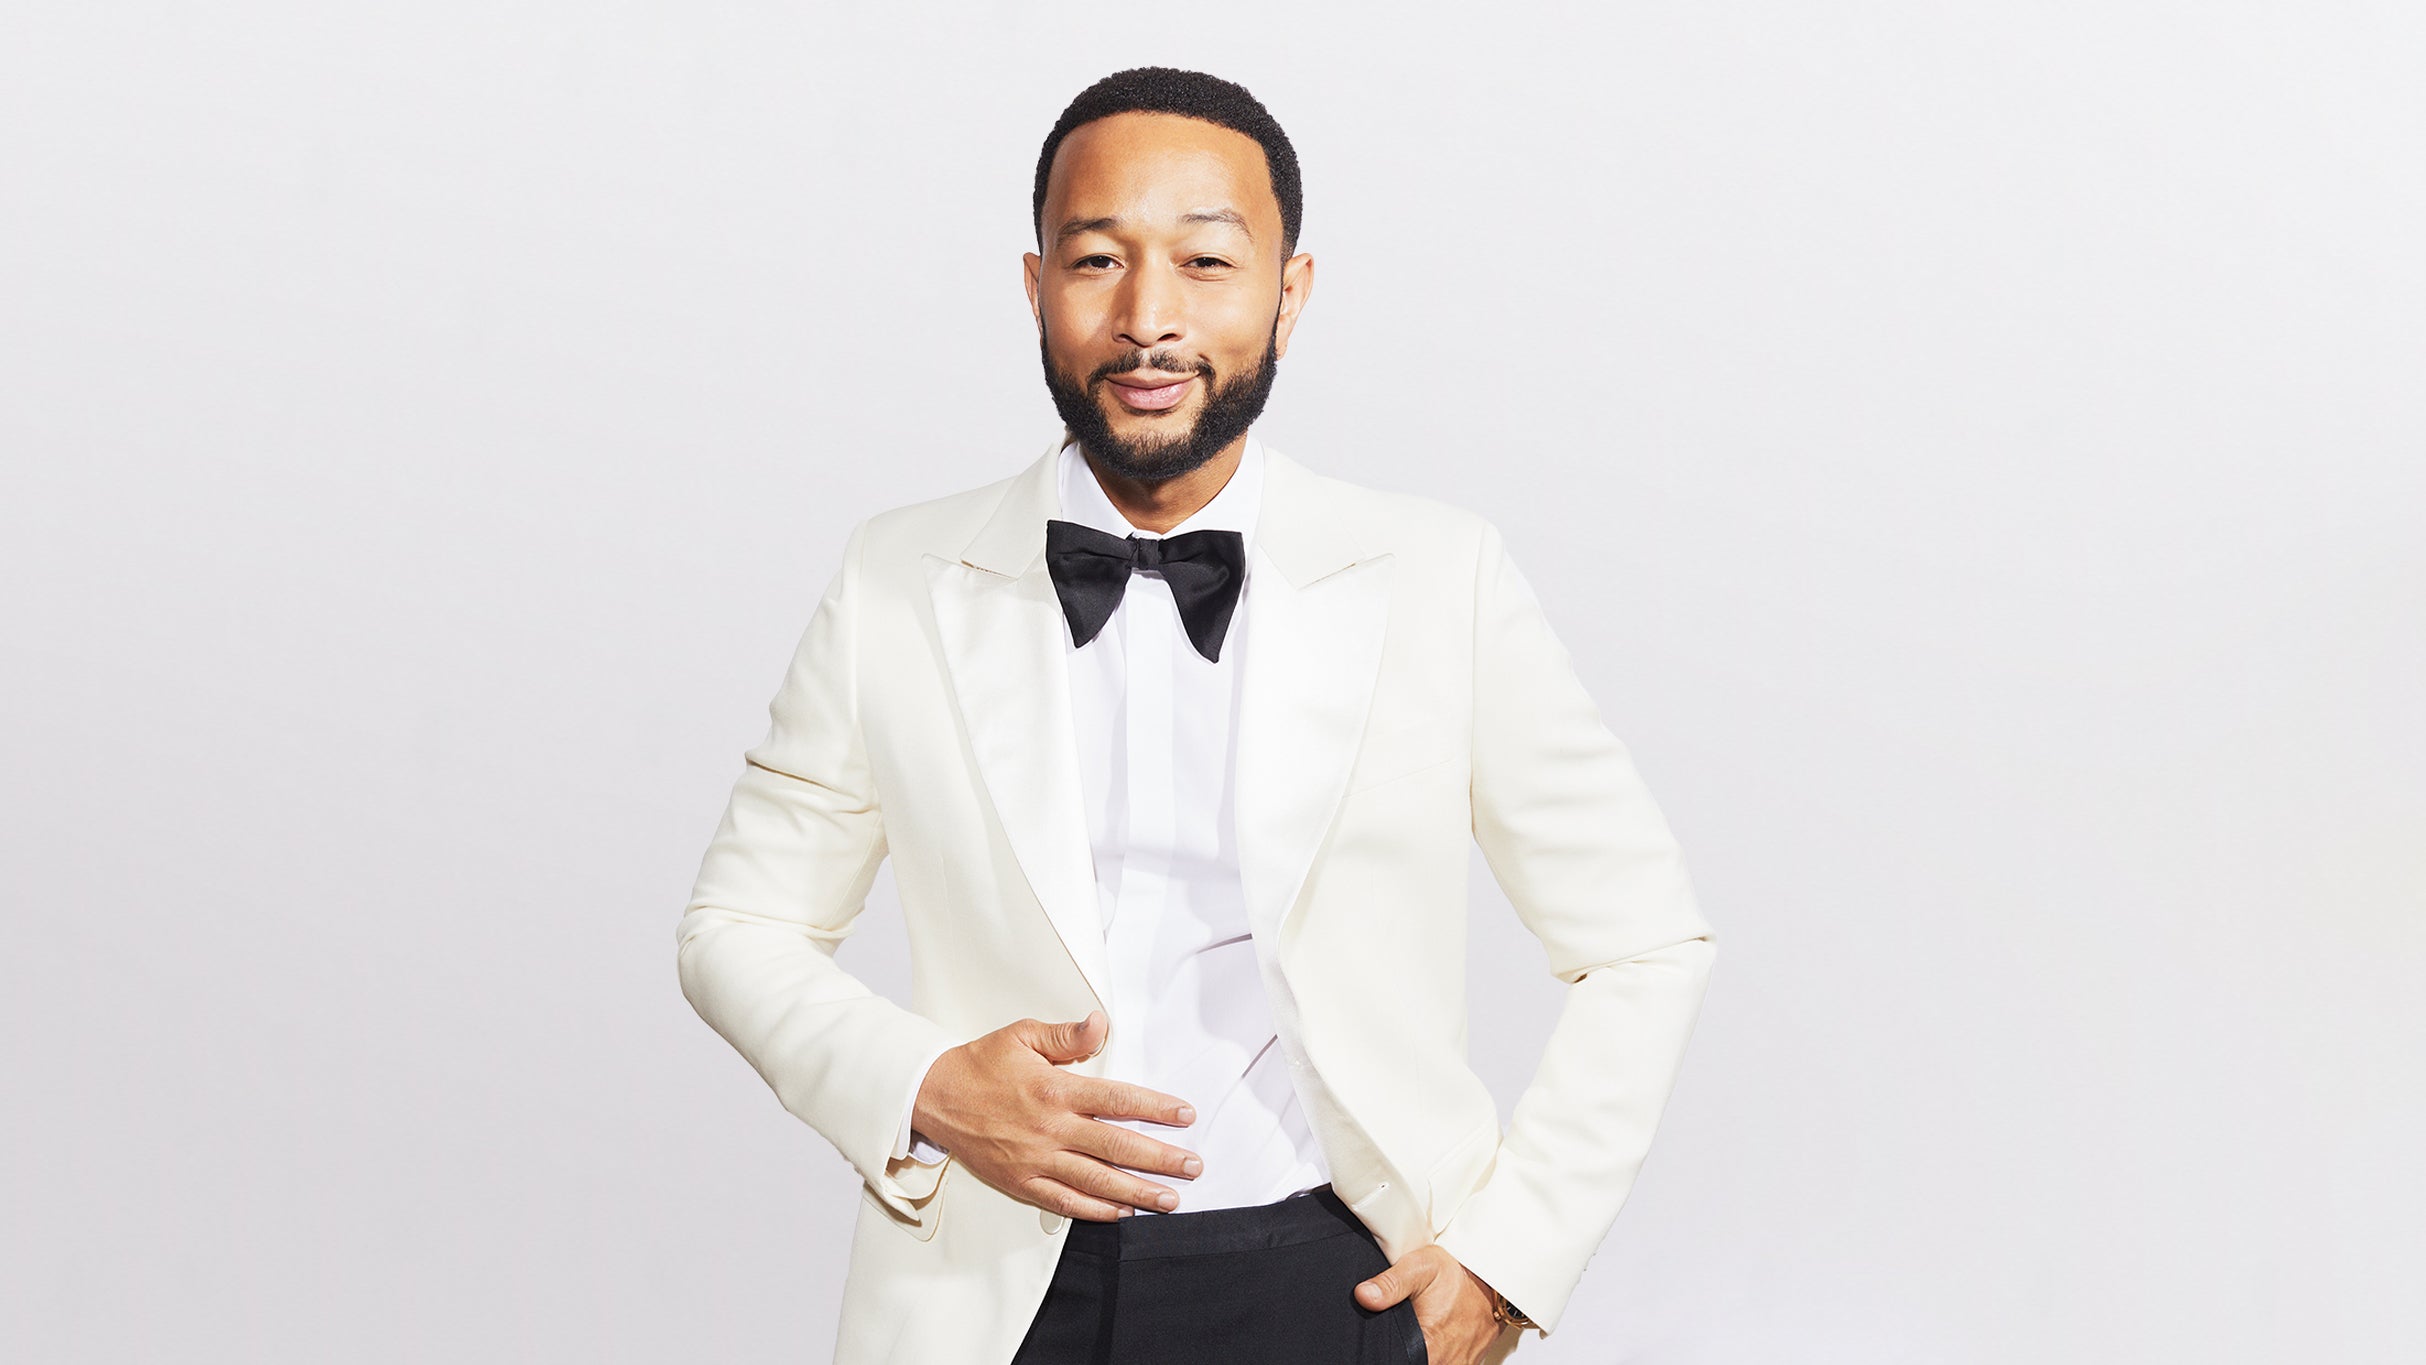 An Evening With John Legend at Choctaw Grand Theater